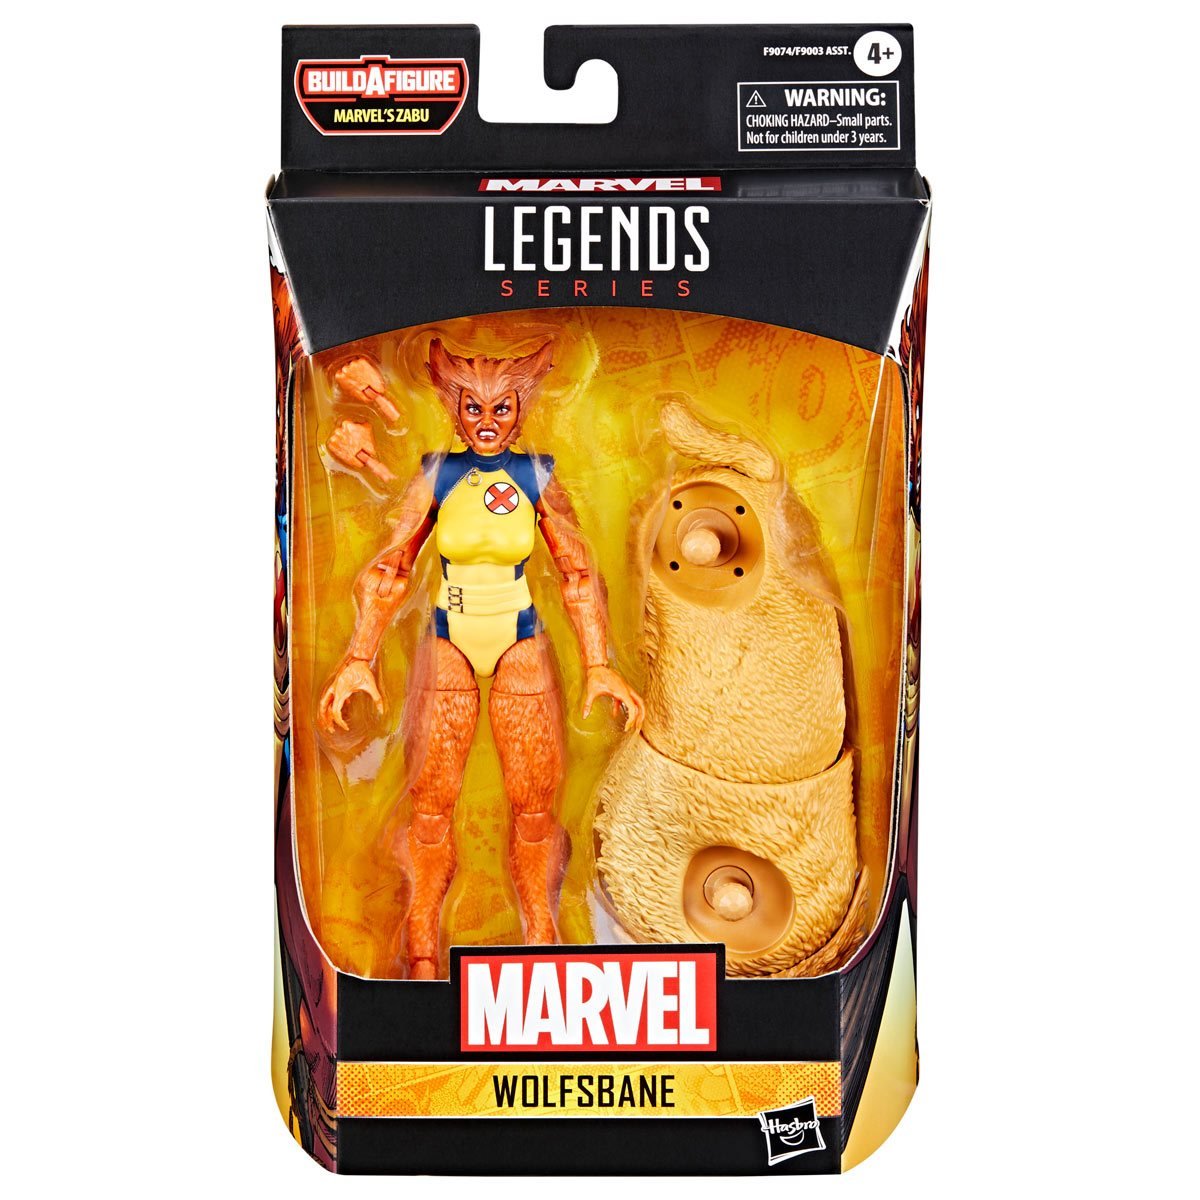 Hasbro Marvel Legends Wolfsbane is in stock at Entertainment Earth, get her down to $22.49 at checkout using my link or code PRETERNIA - bit.ly/3QCxdSg Free shipping on $79+ orders, here are all new EE in-stocks - bit.ly/3UnfCA6